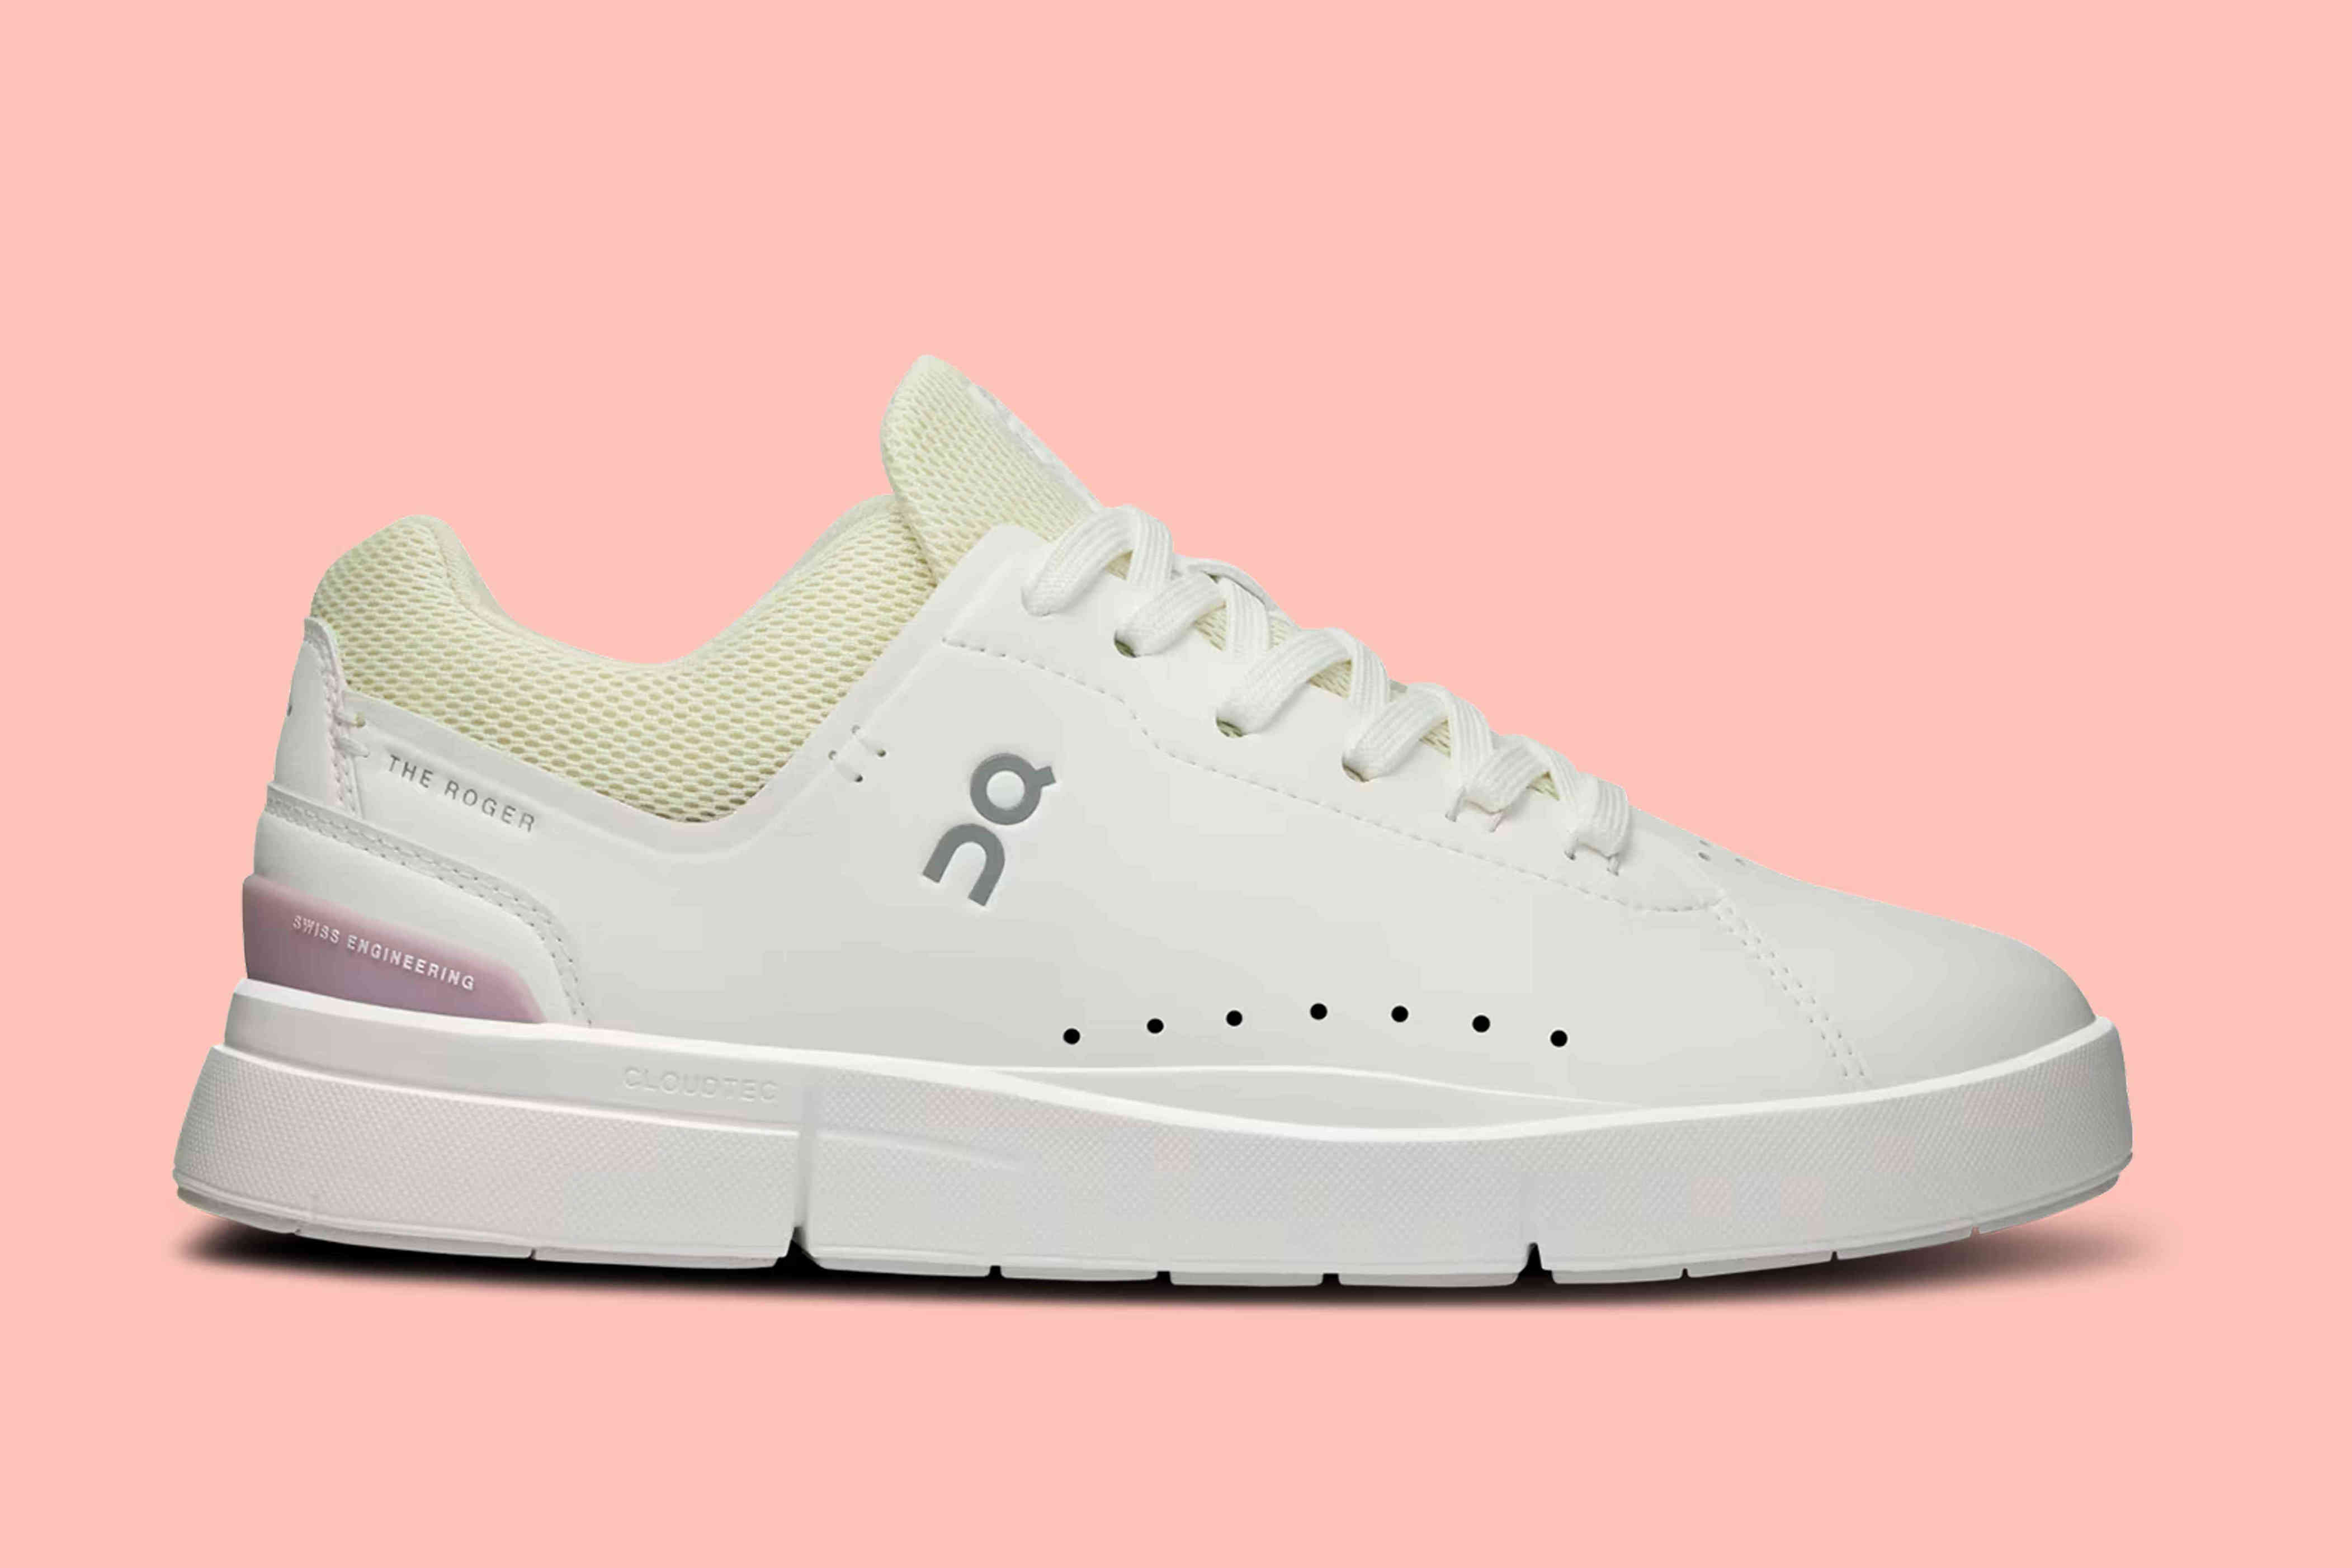 i do a lot of walking, and these sneakers might just be the comfiest i've ever worn